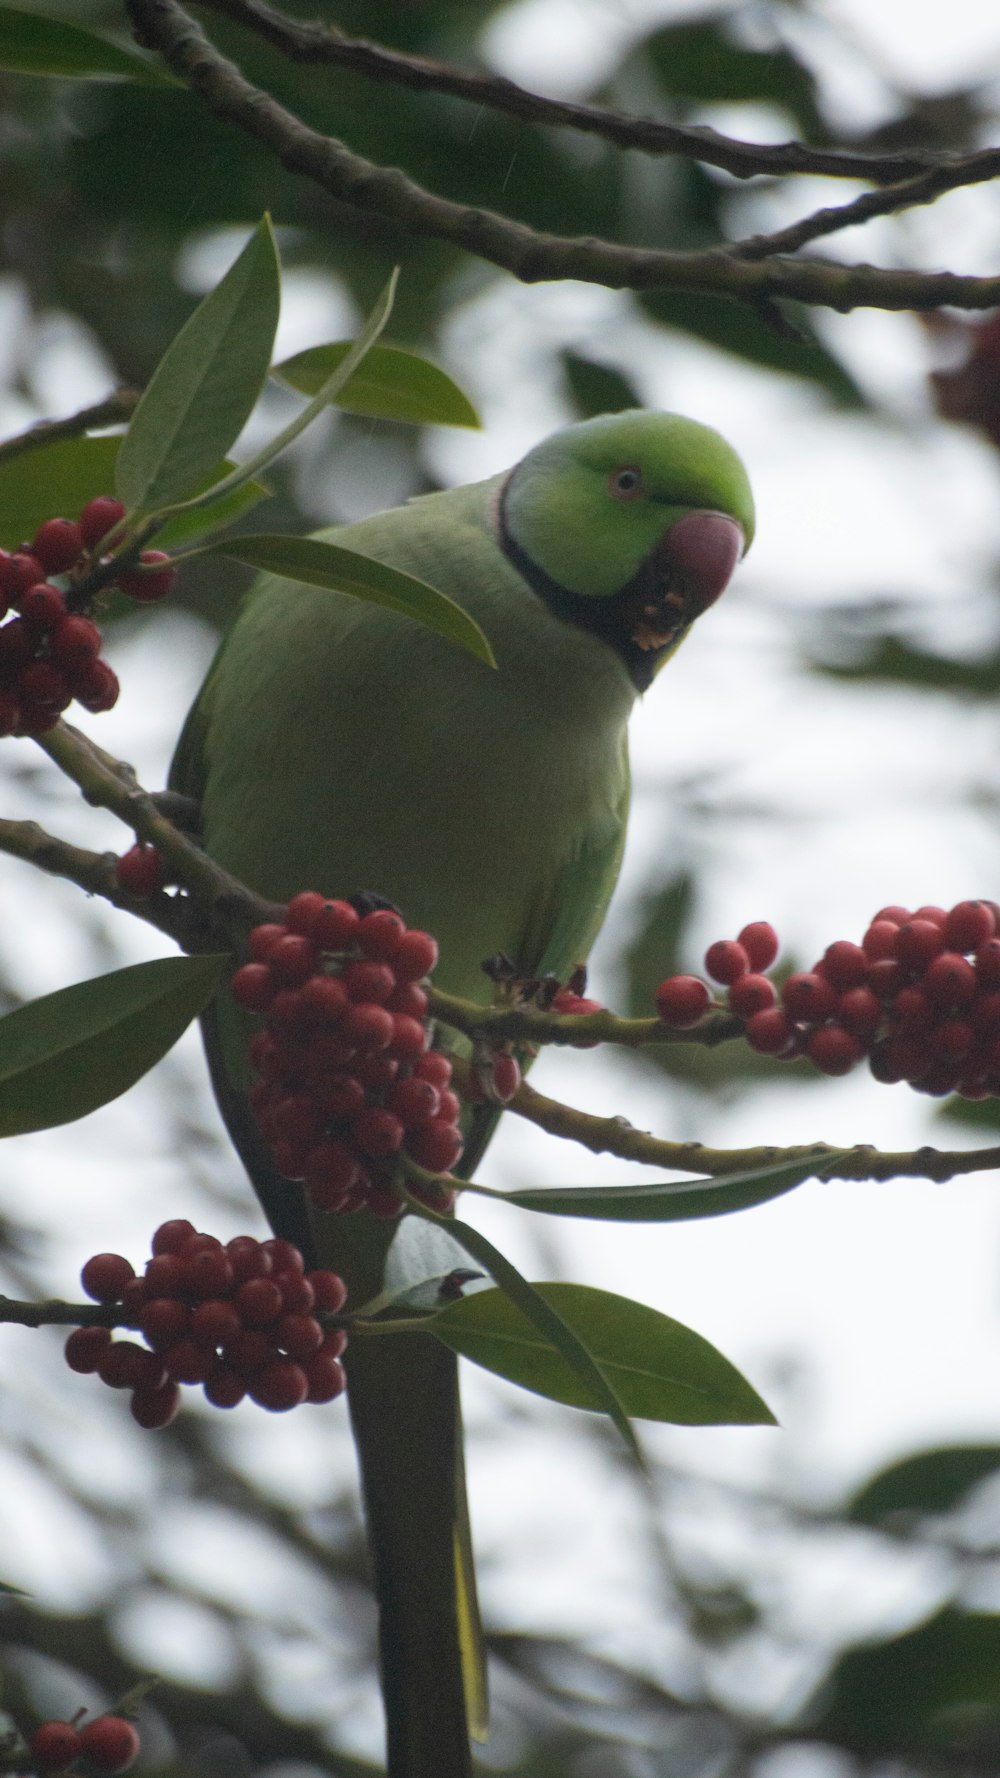 a green bird sitting on top of a tree branch